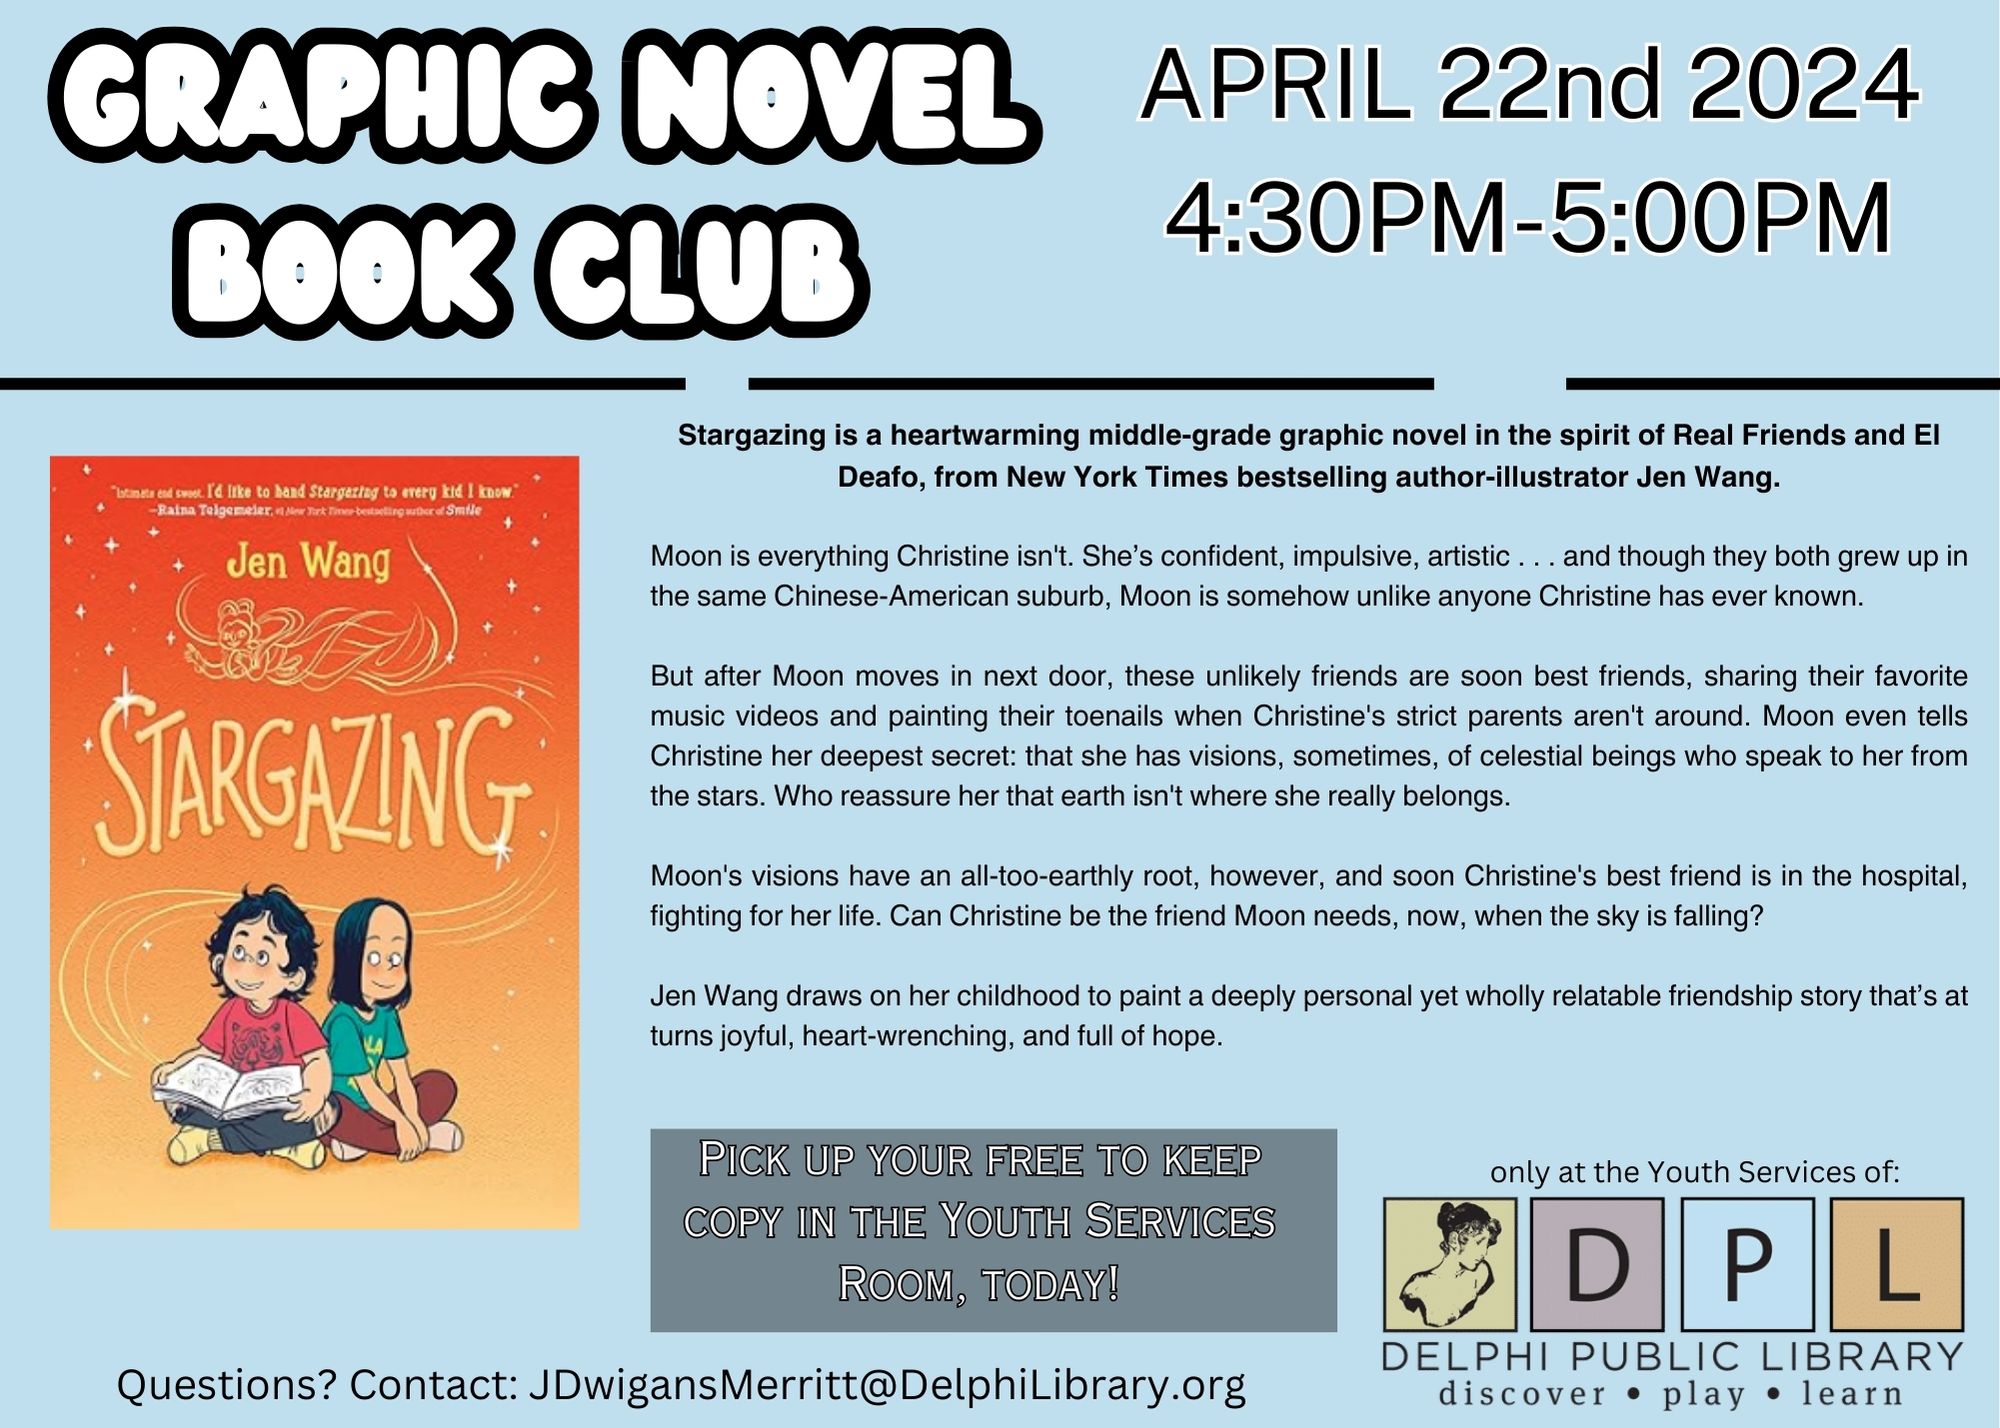 Youth Graphic Novel Book Club: Stargazing. April 22nd 2024 at 4:30pm in the Makerspace. Only at Delphi Public Library 